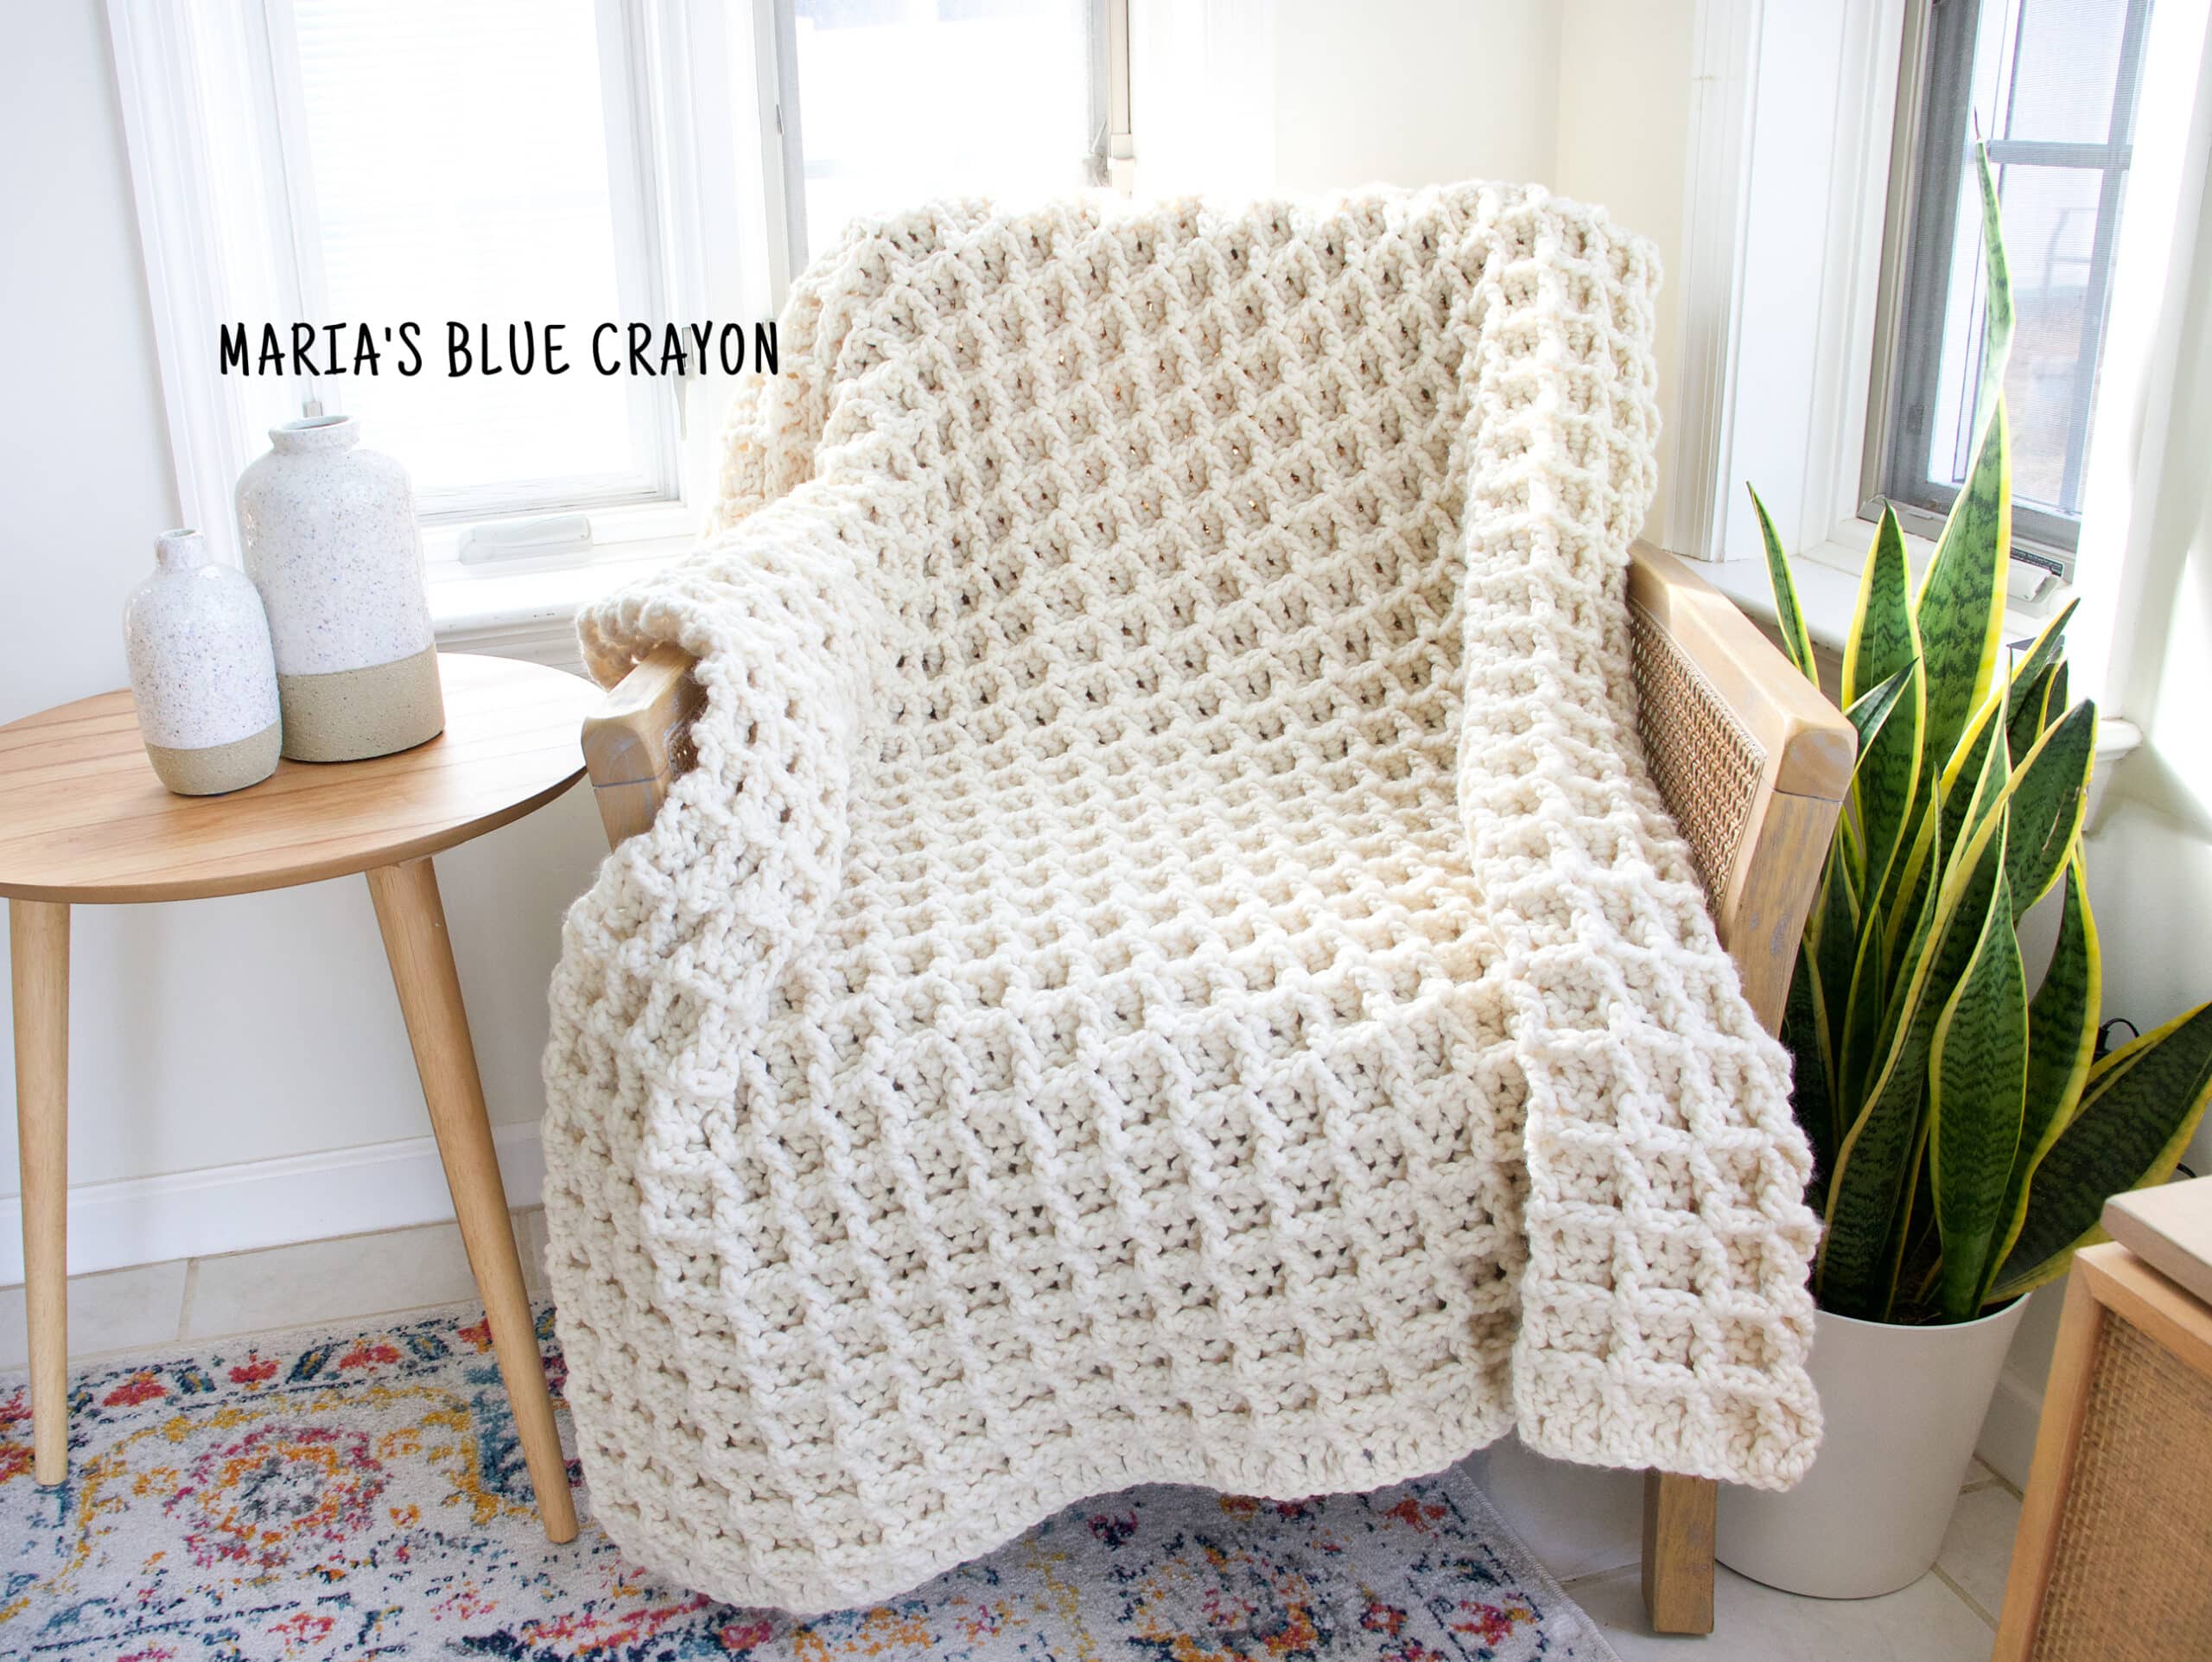 Free Crochet Patterns for Bulky Weight Yarn